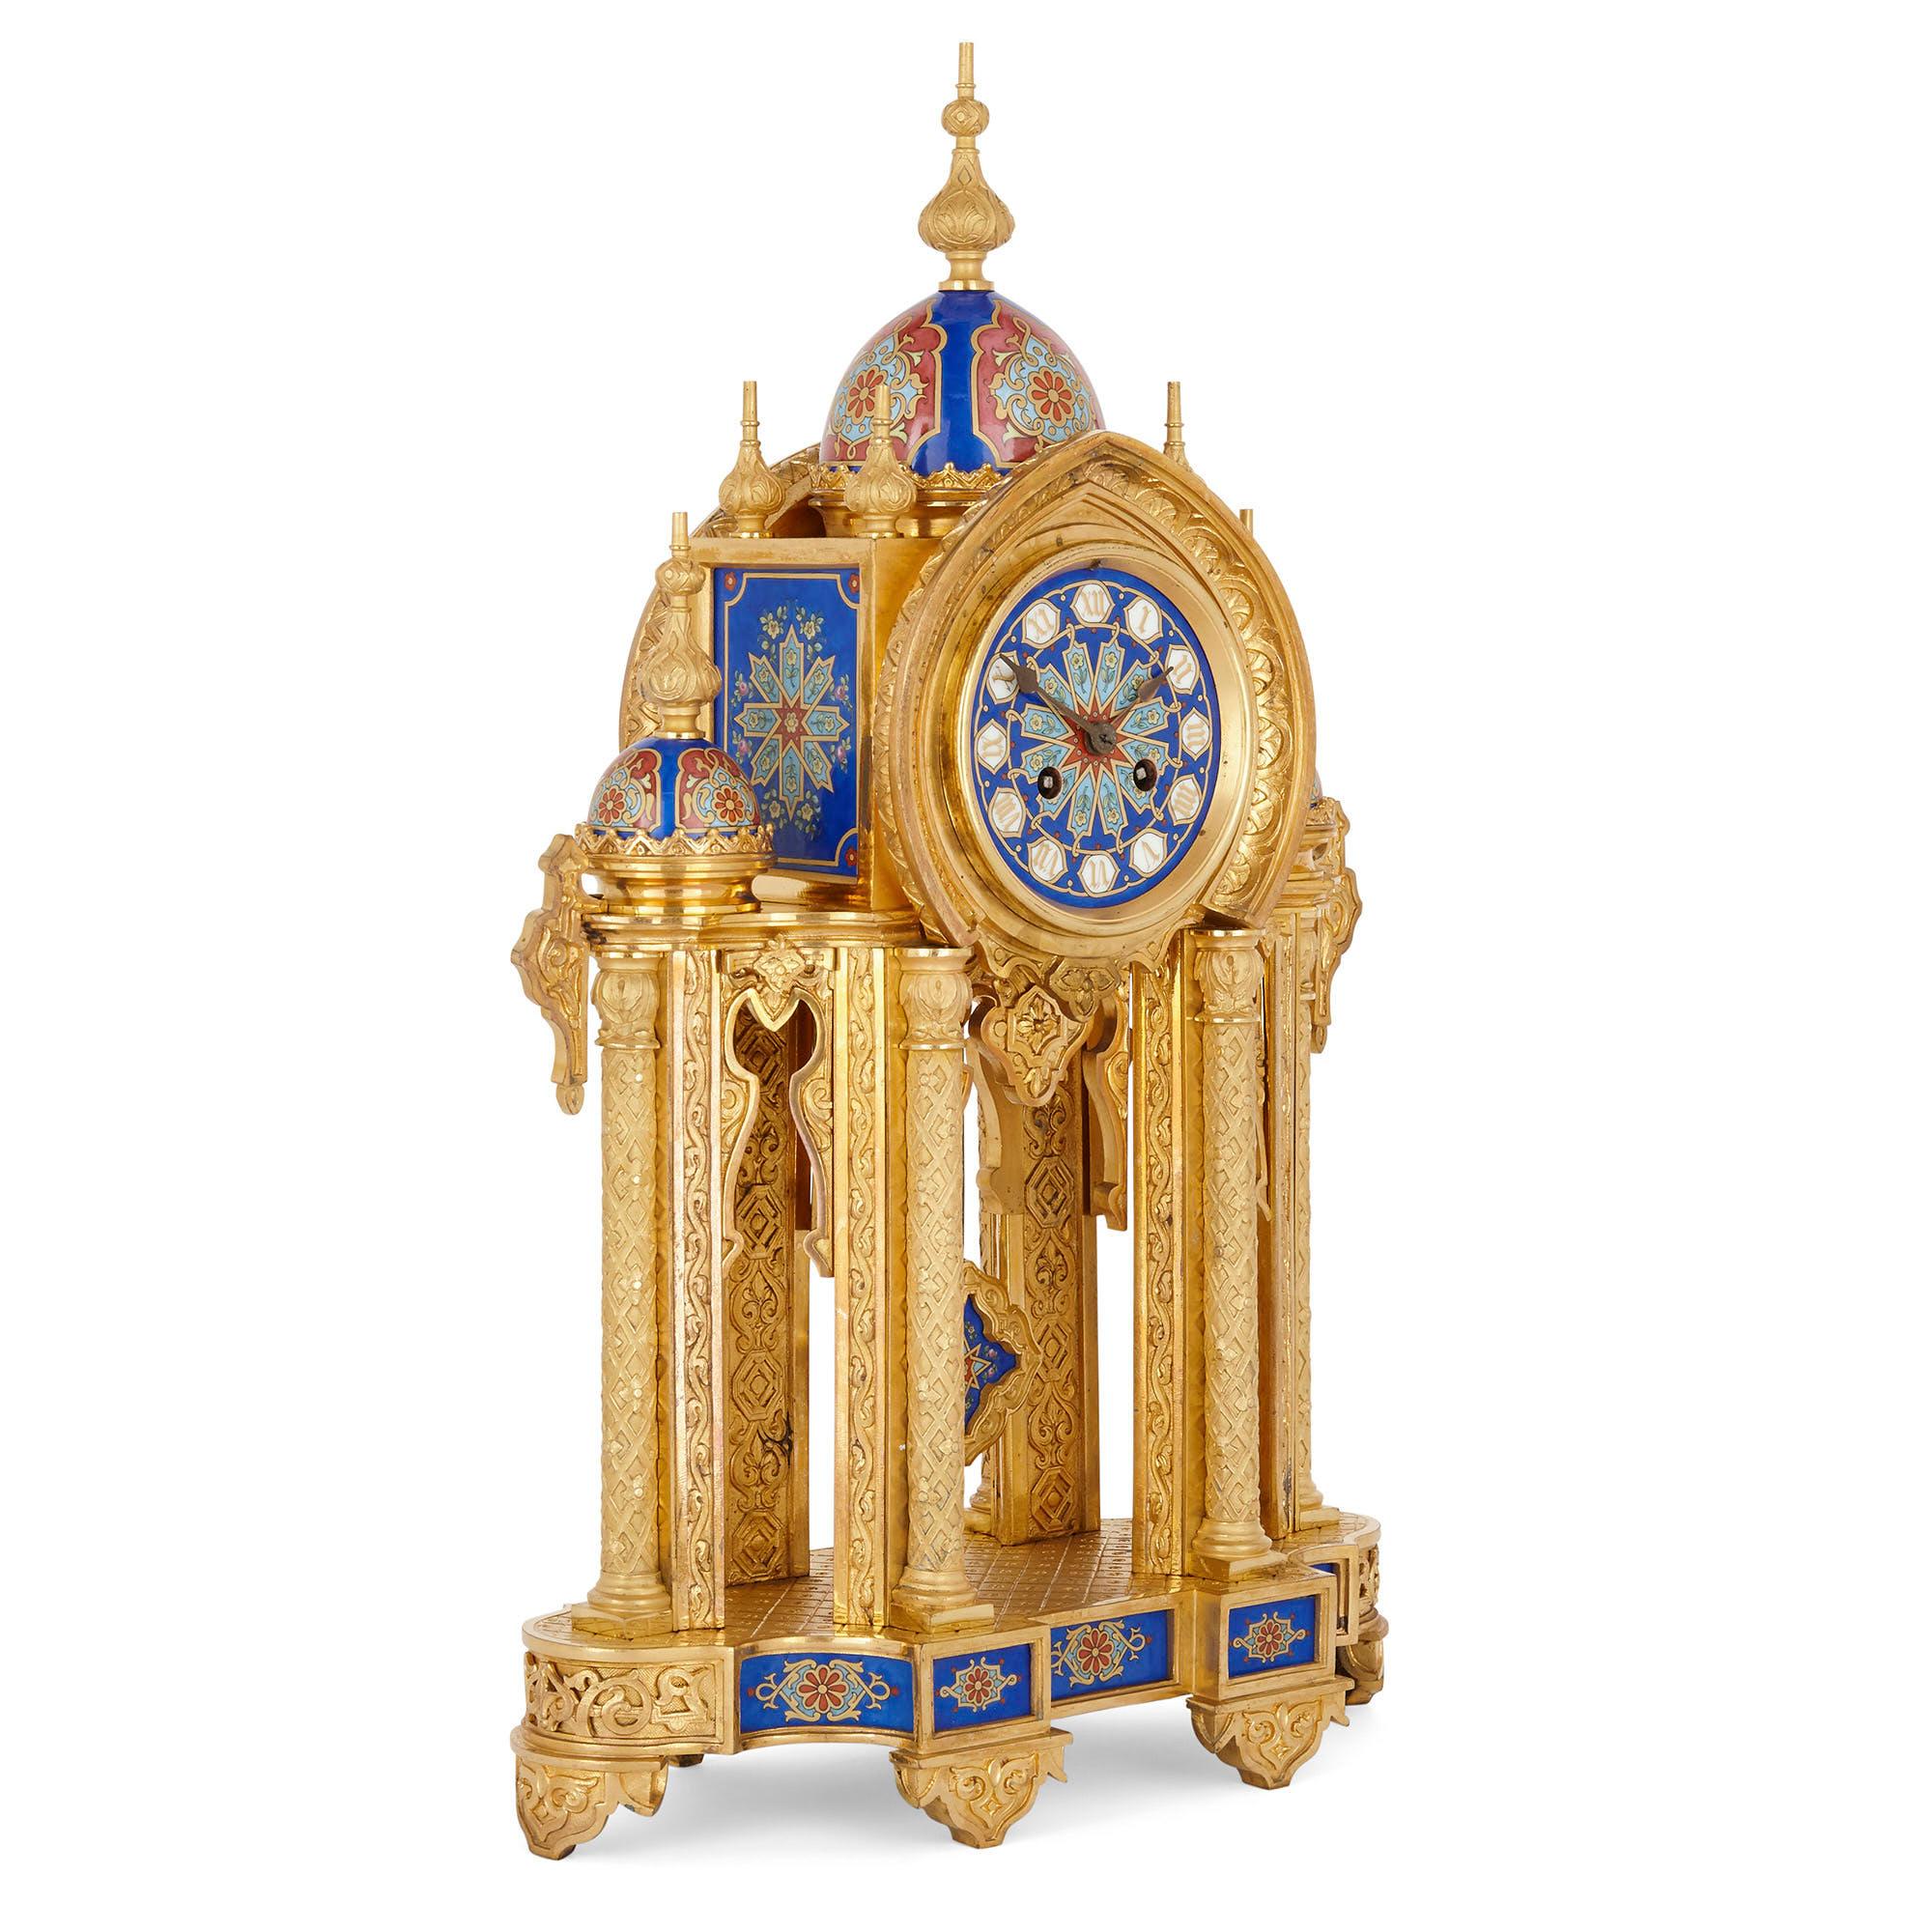 This beautiful clock, formed from gilt bronze and porcelain, is designed and decorated in a discernibly Moorish style. The clock is supported by a flat shaped gilt bronze base, the base supporting four gilt bronze columns that support the gilt